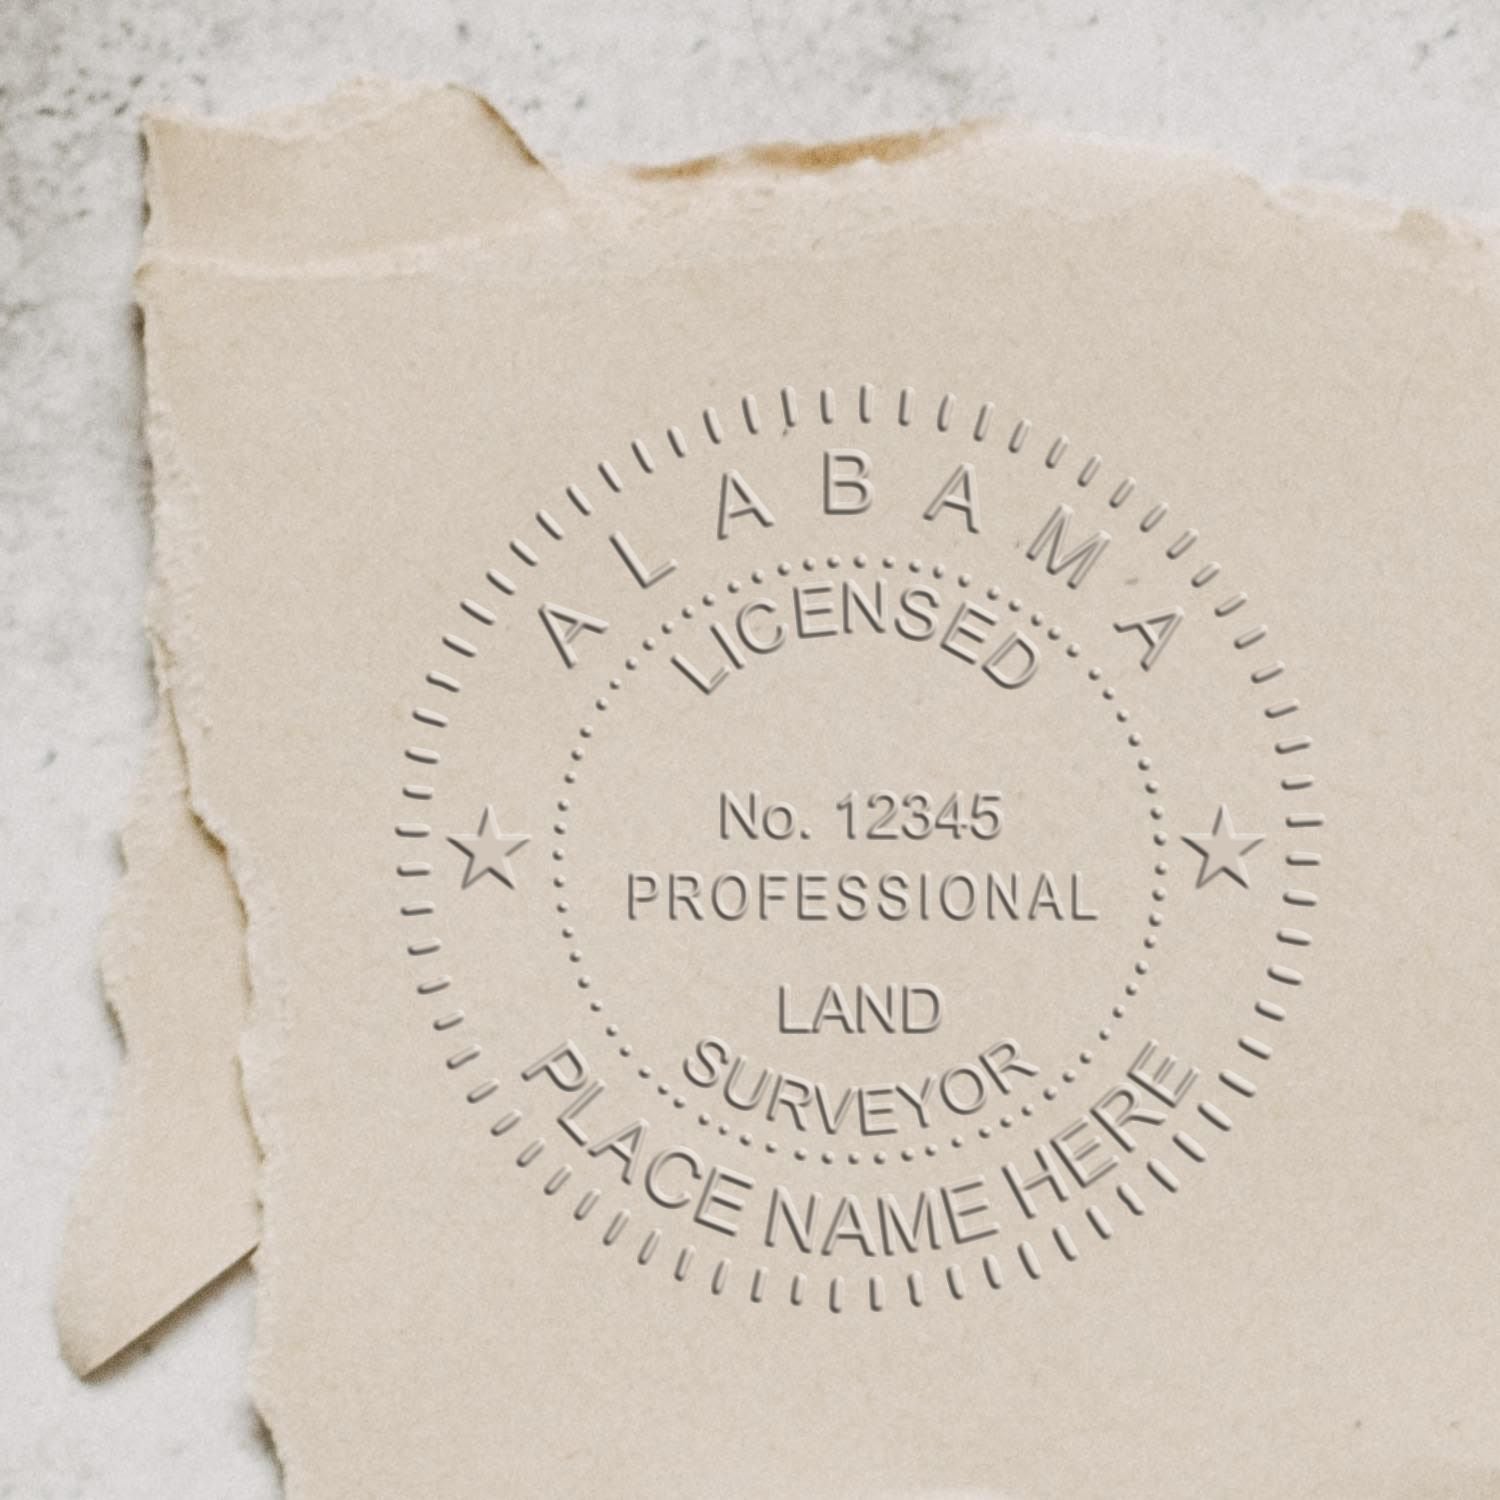 An in use photo of the Hybrid Alabama Land Surveyor Seal showing a sample imprint on a cardstock